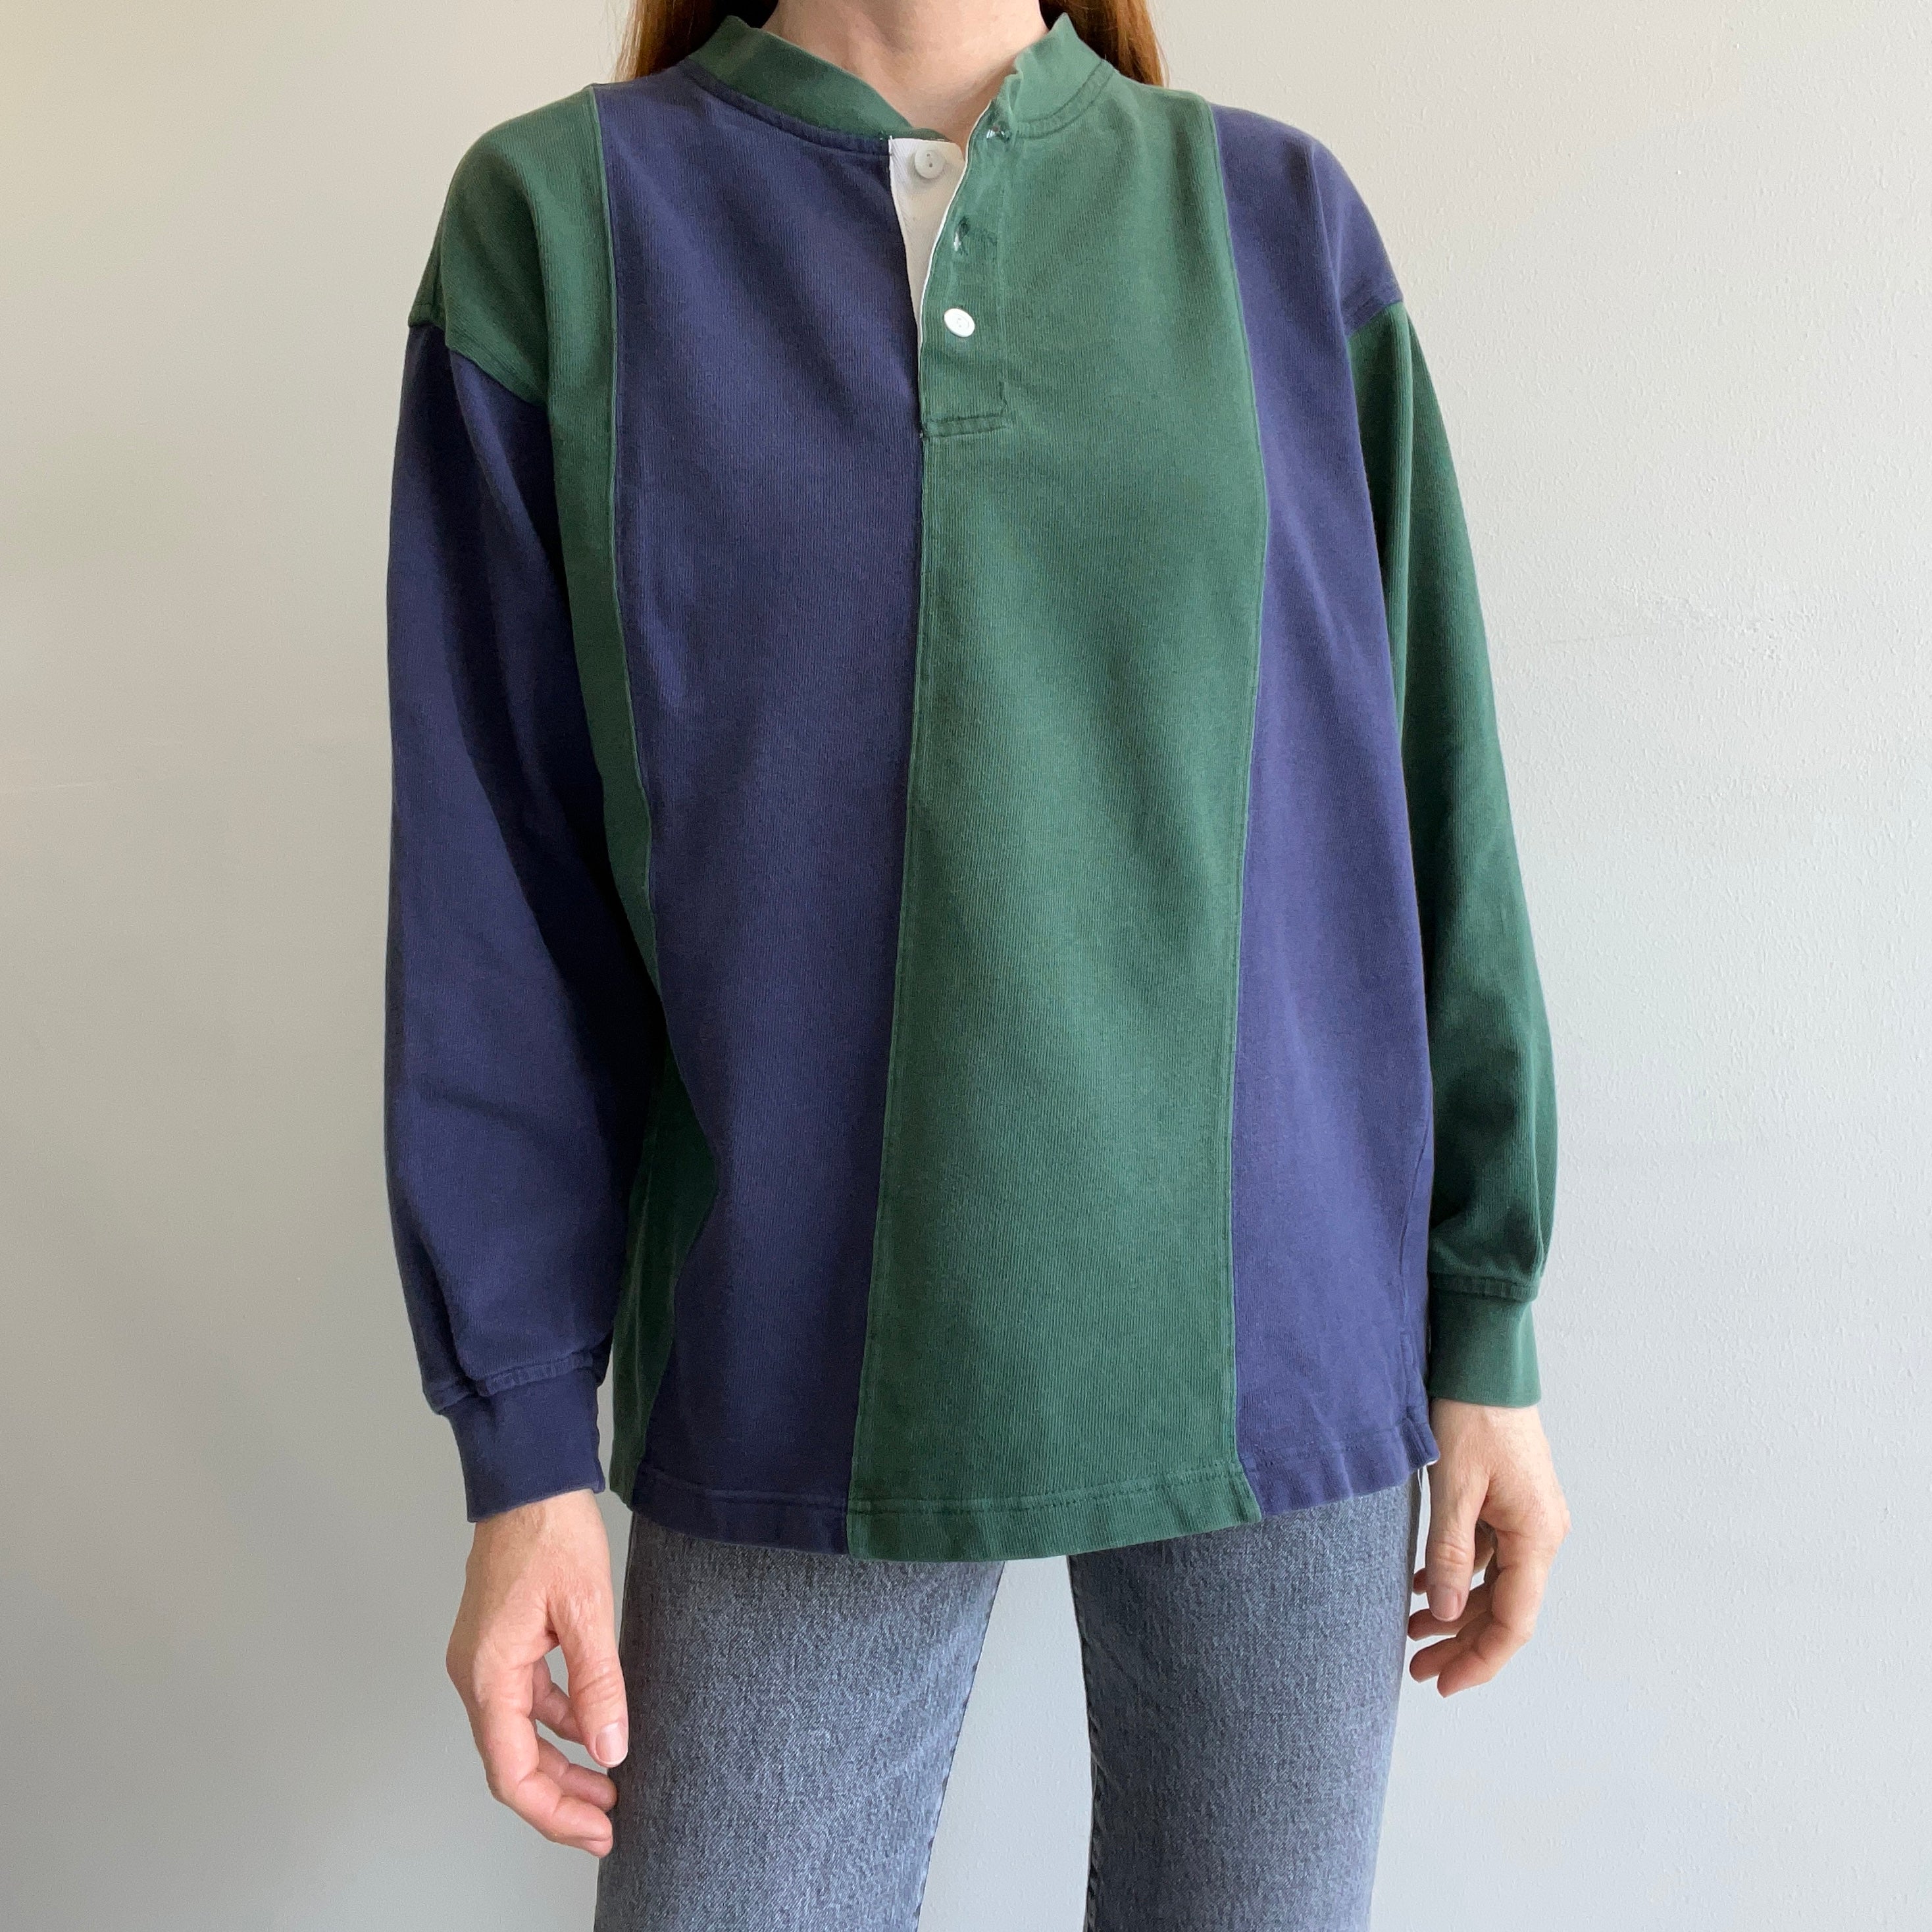 1990s Rad Henley Rugby Long Sleeve Shirt